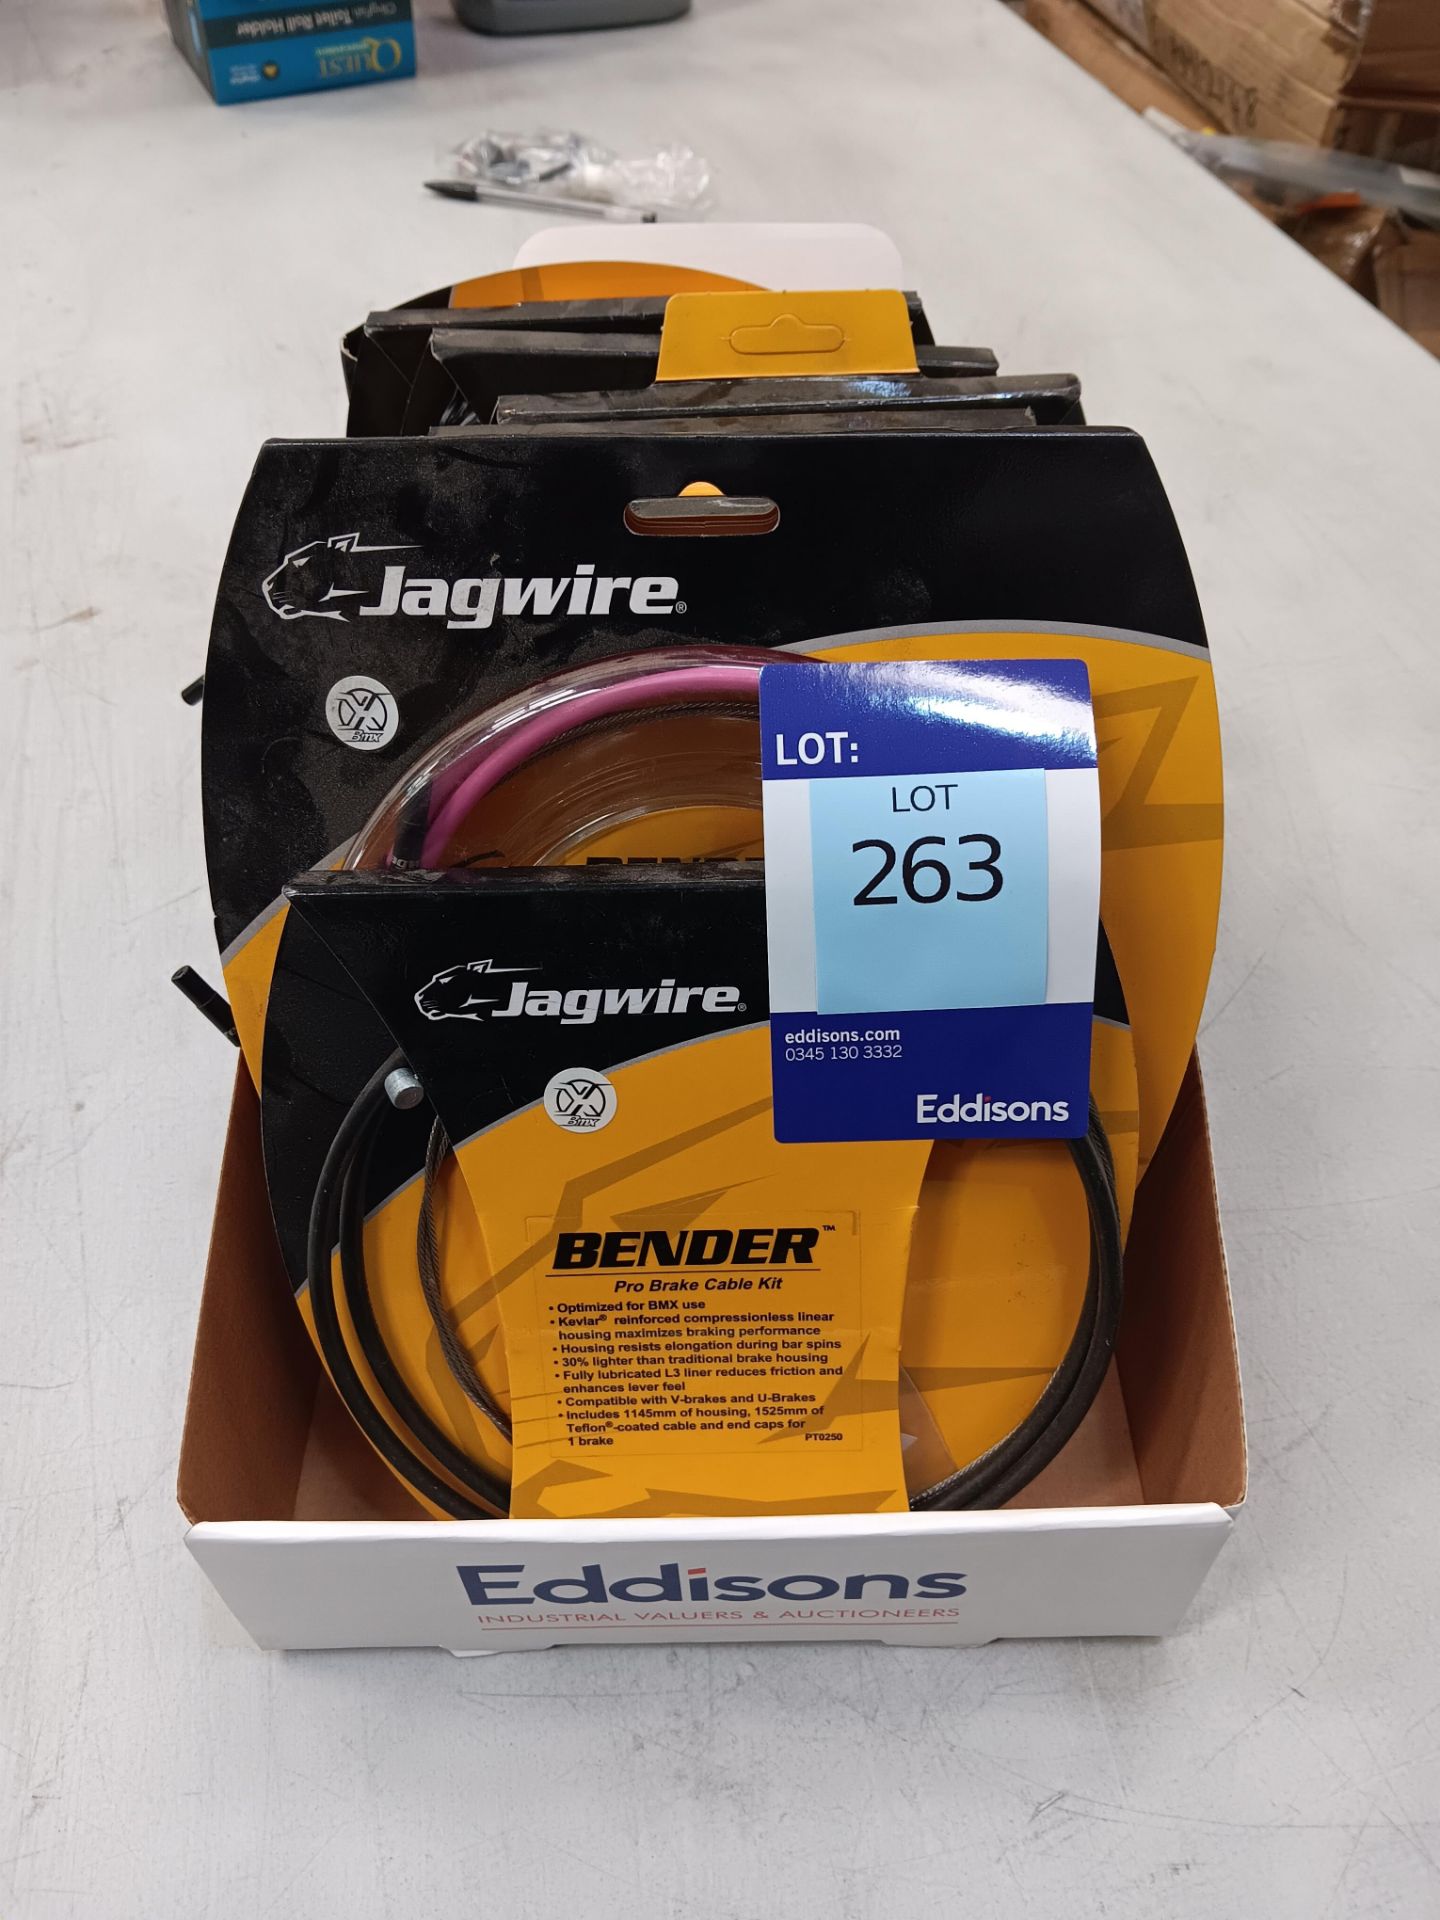 11 x Jagwire Bender Pro Brake Cable Kit (Please note, Viewing Strongly Recommended - Eddisons have